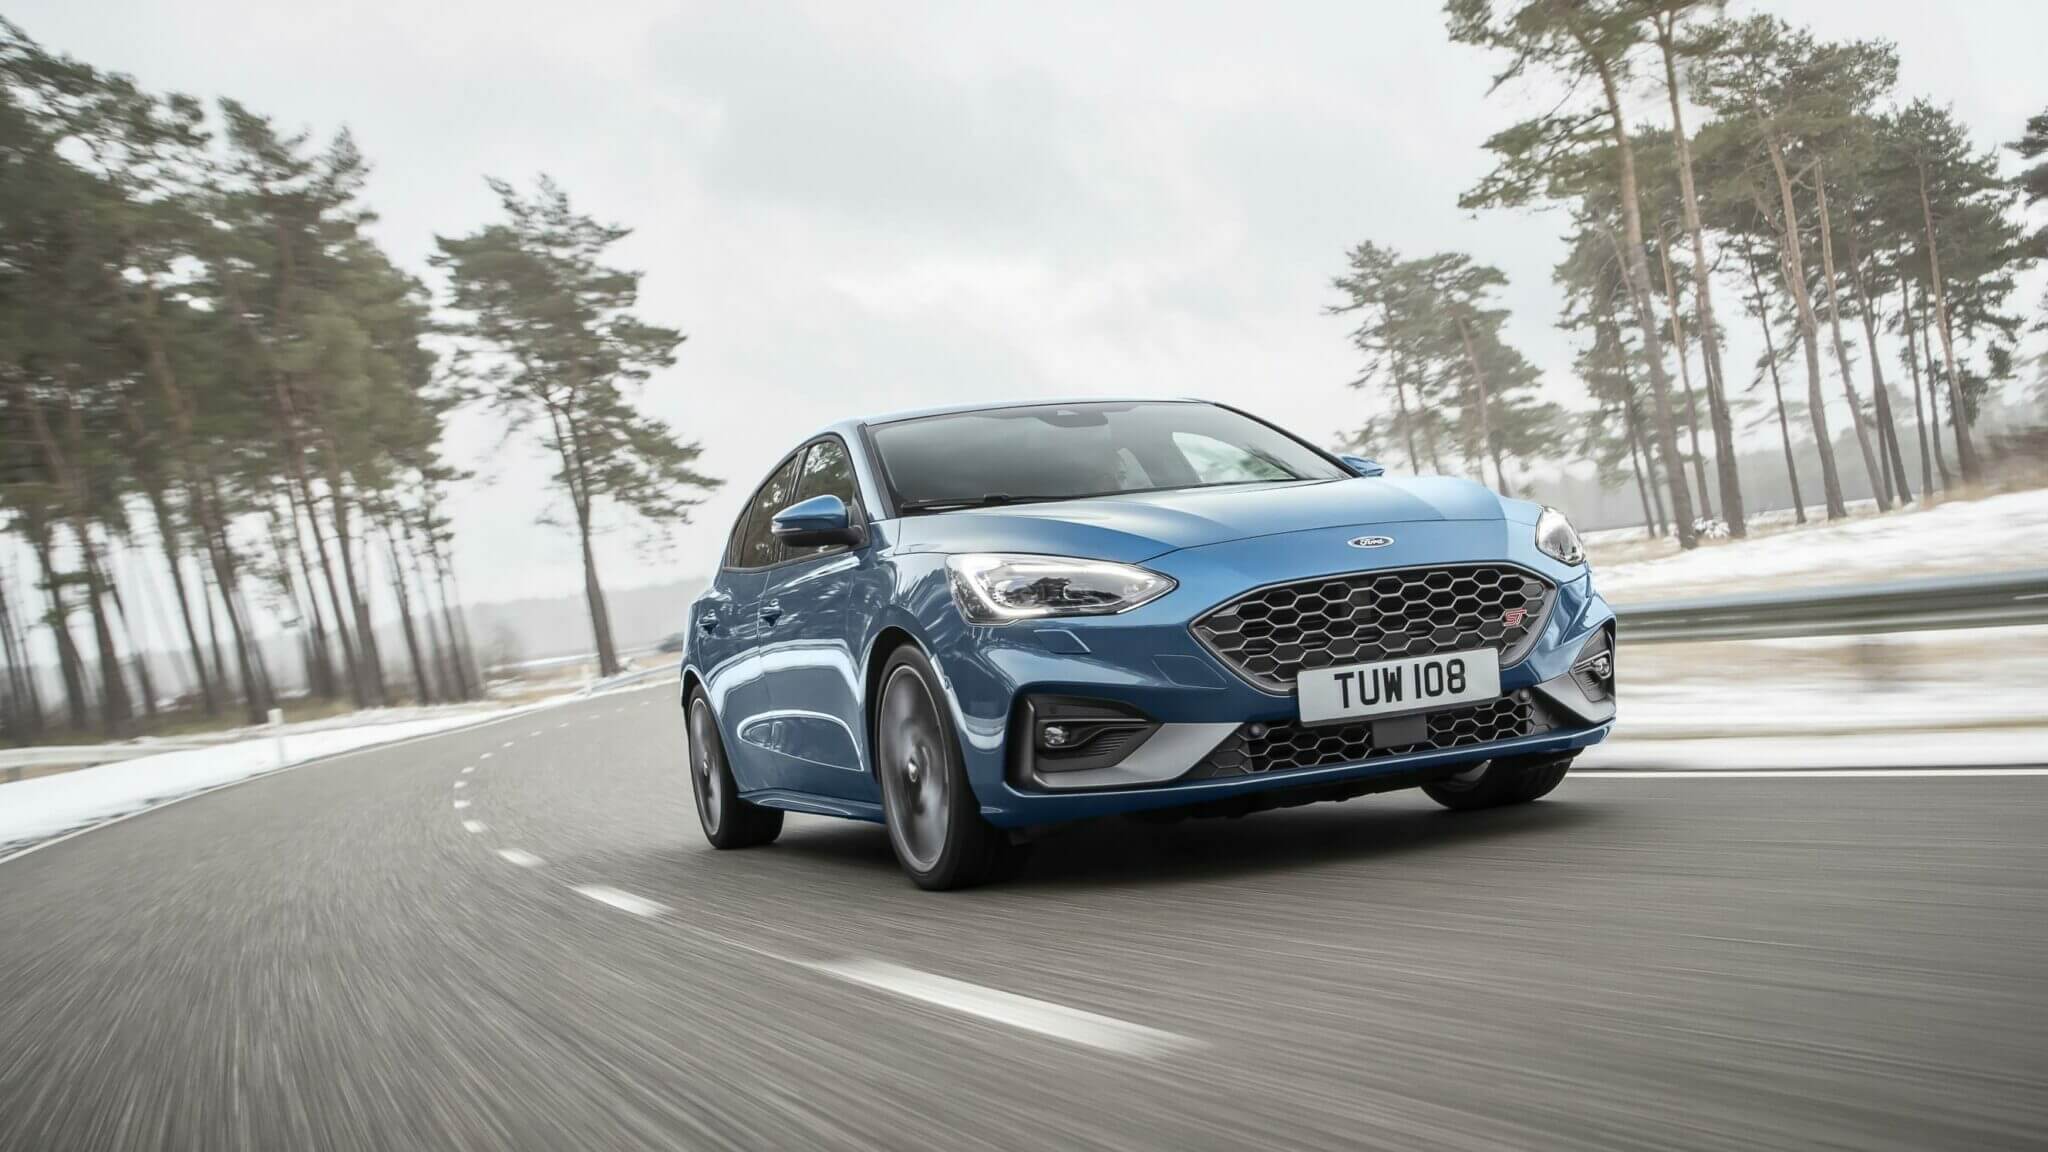 Ford Reveals Focus Active Wagon, Refers To It As “Crossover